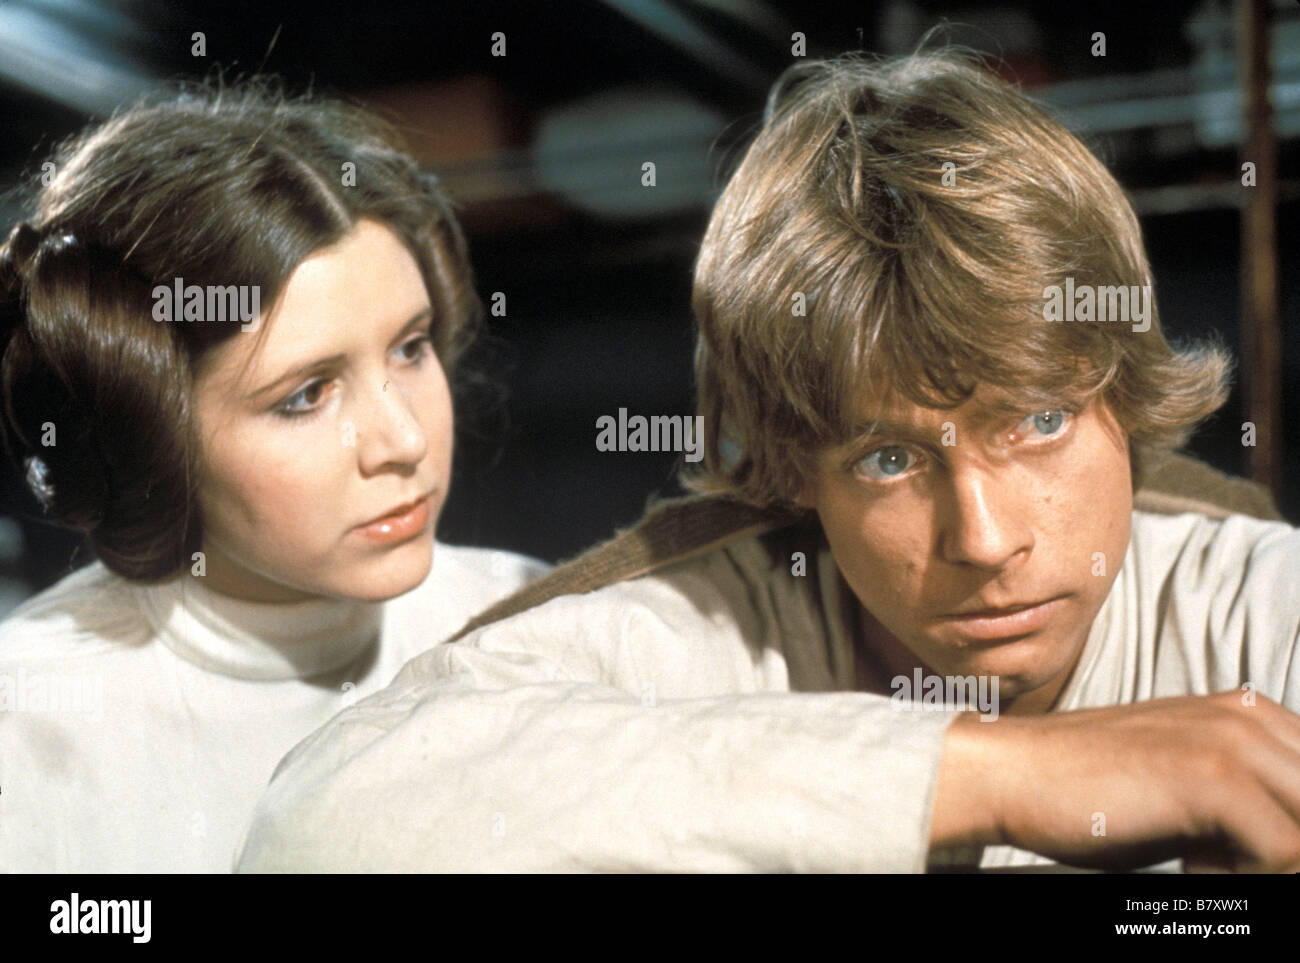 Star Wars: Episode IV - A New Hope Year: 1977 USA Director: George Lucas Mark Hamill, Carrie Fisher Stock Photo